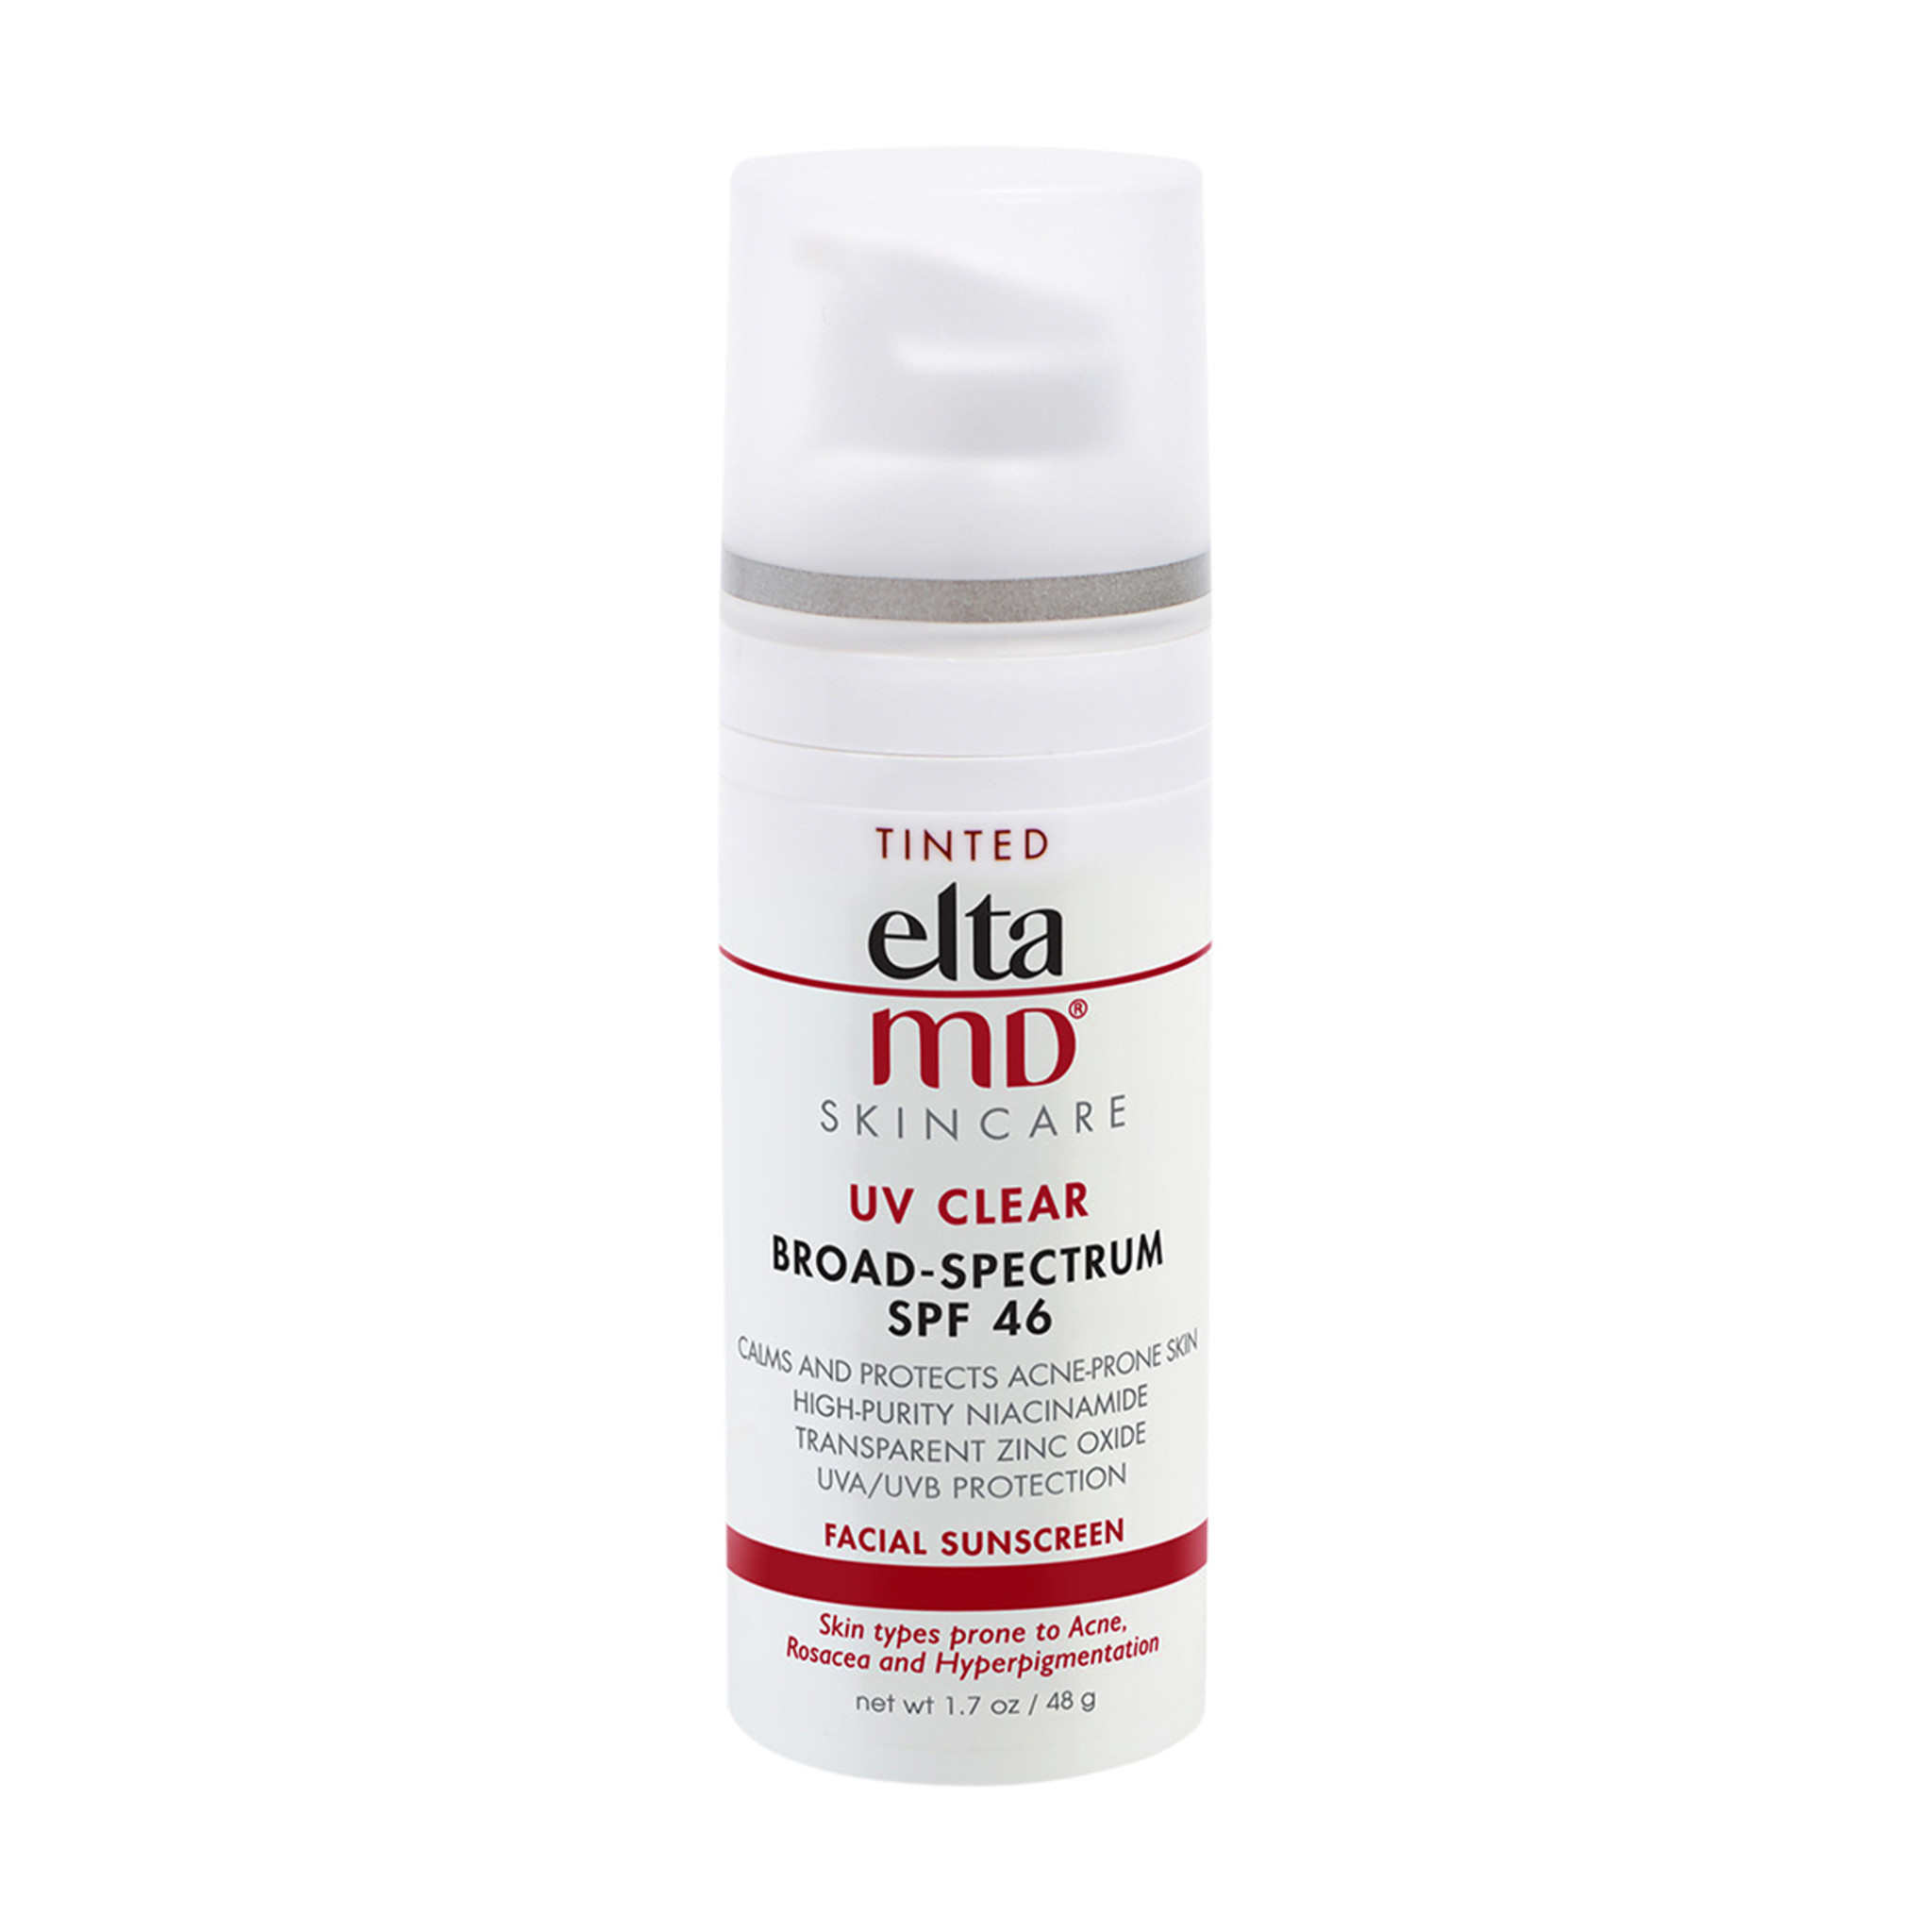 Spray can of Elta Md MD UV Clear Tinted Broad Spectrum Facial Sunscreen SPF 46